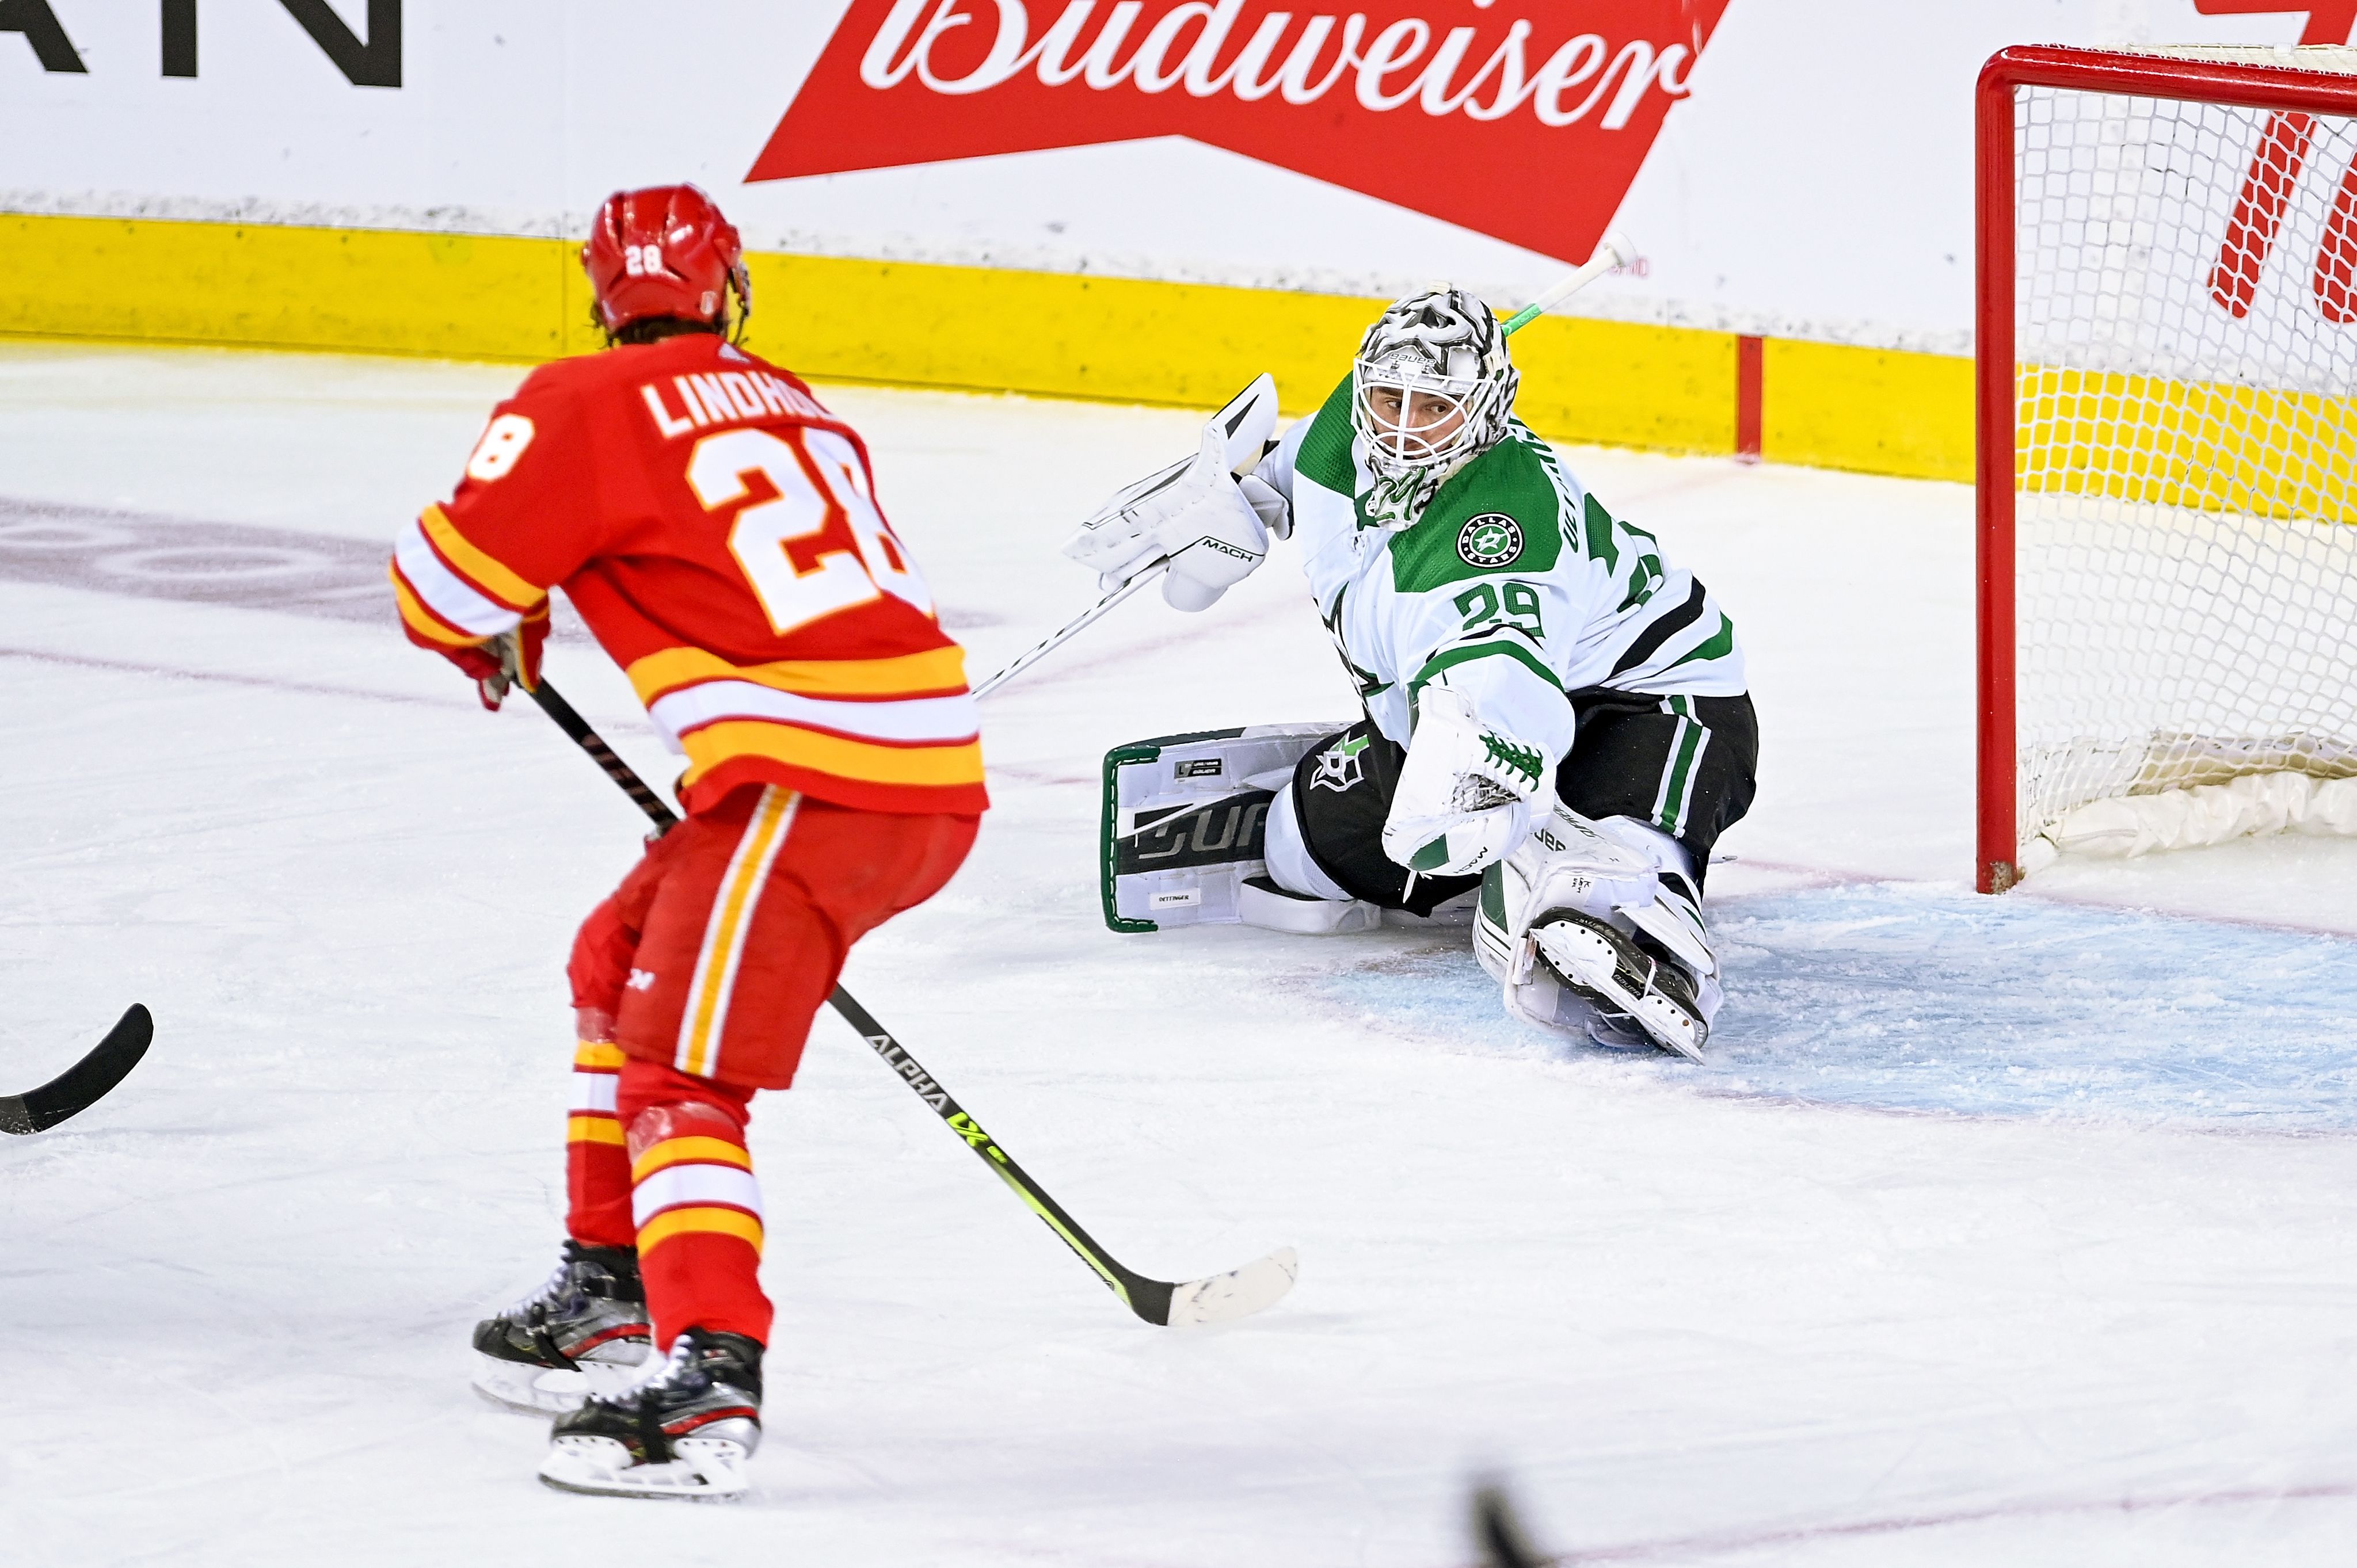 A Calgary player near the Dallas goal and the Dallas goalie sprawled out